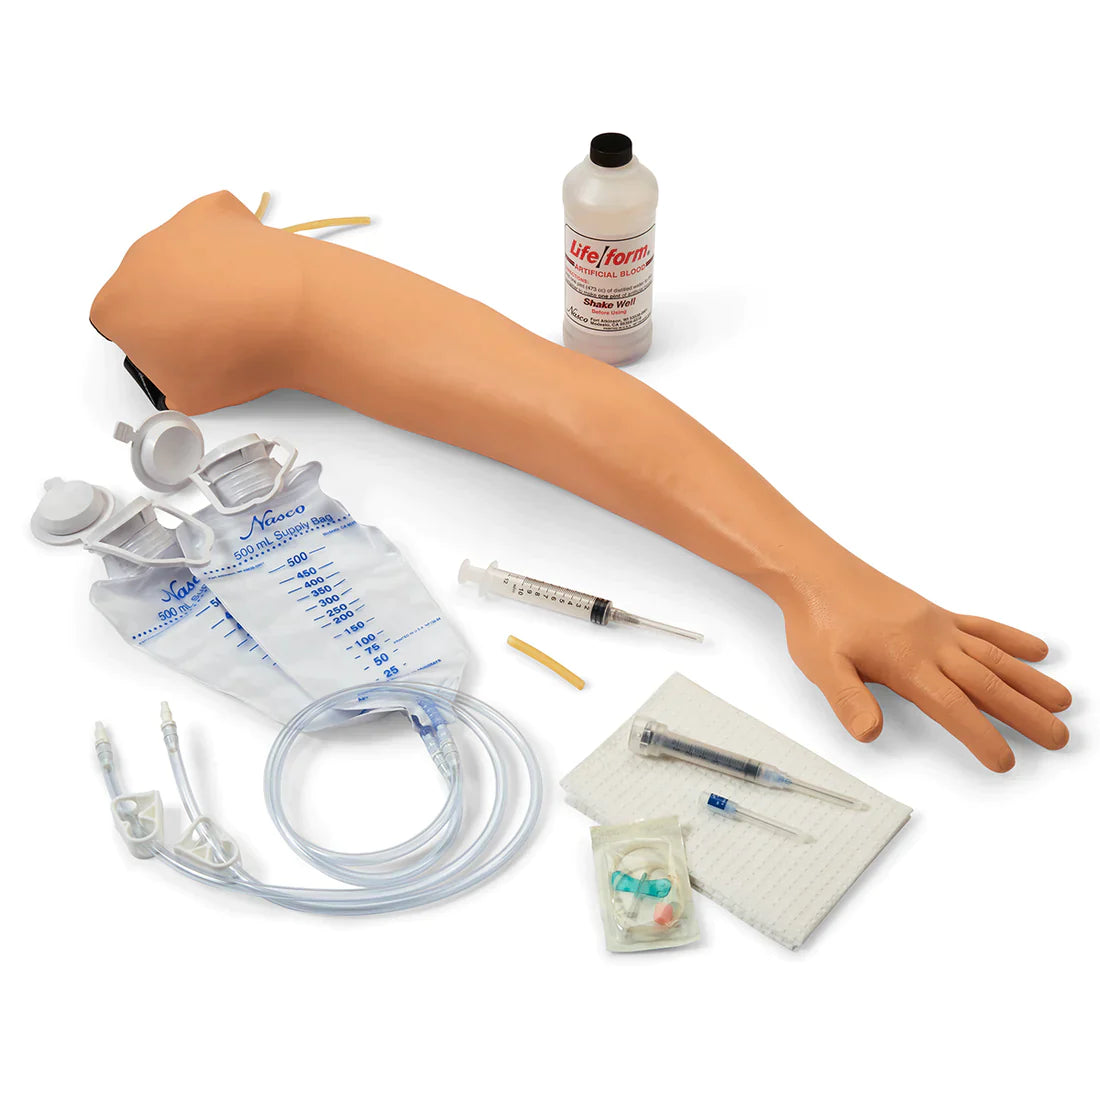 Life/form? Adult Venipuncture and Injection Training Arm - Light